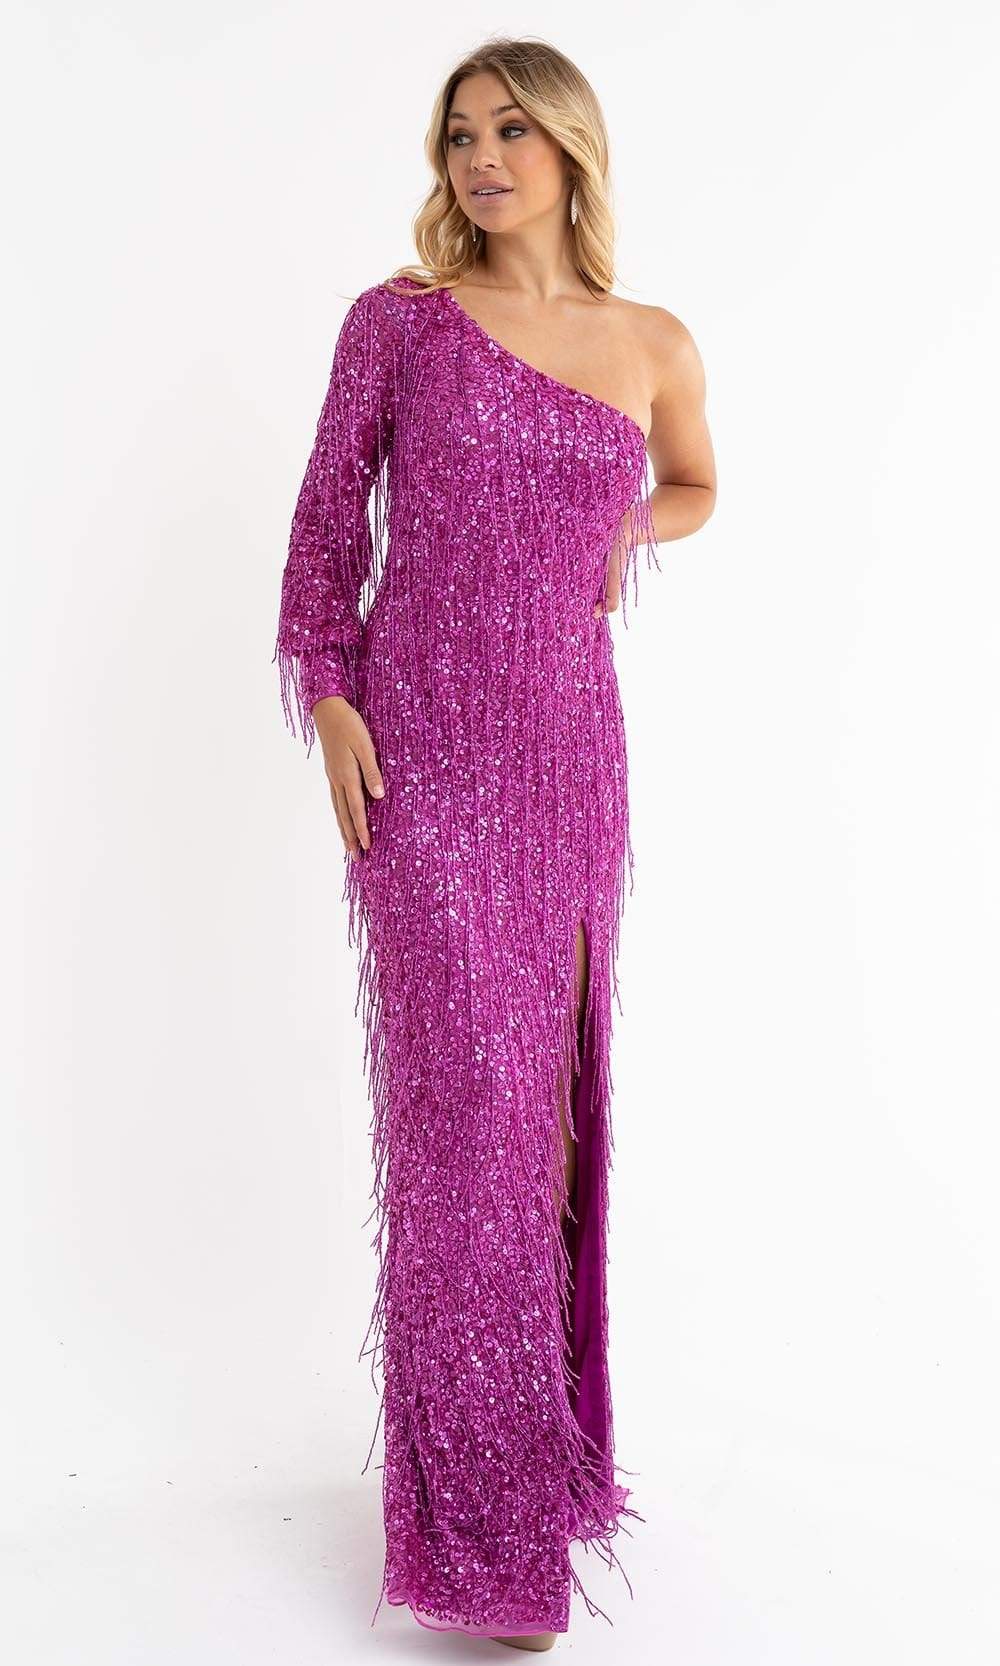 Primavera Couture - 3739 Sequin Asymmetrical Gown Special Occasion Dress